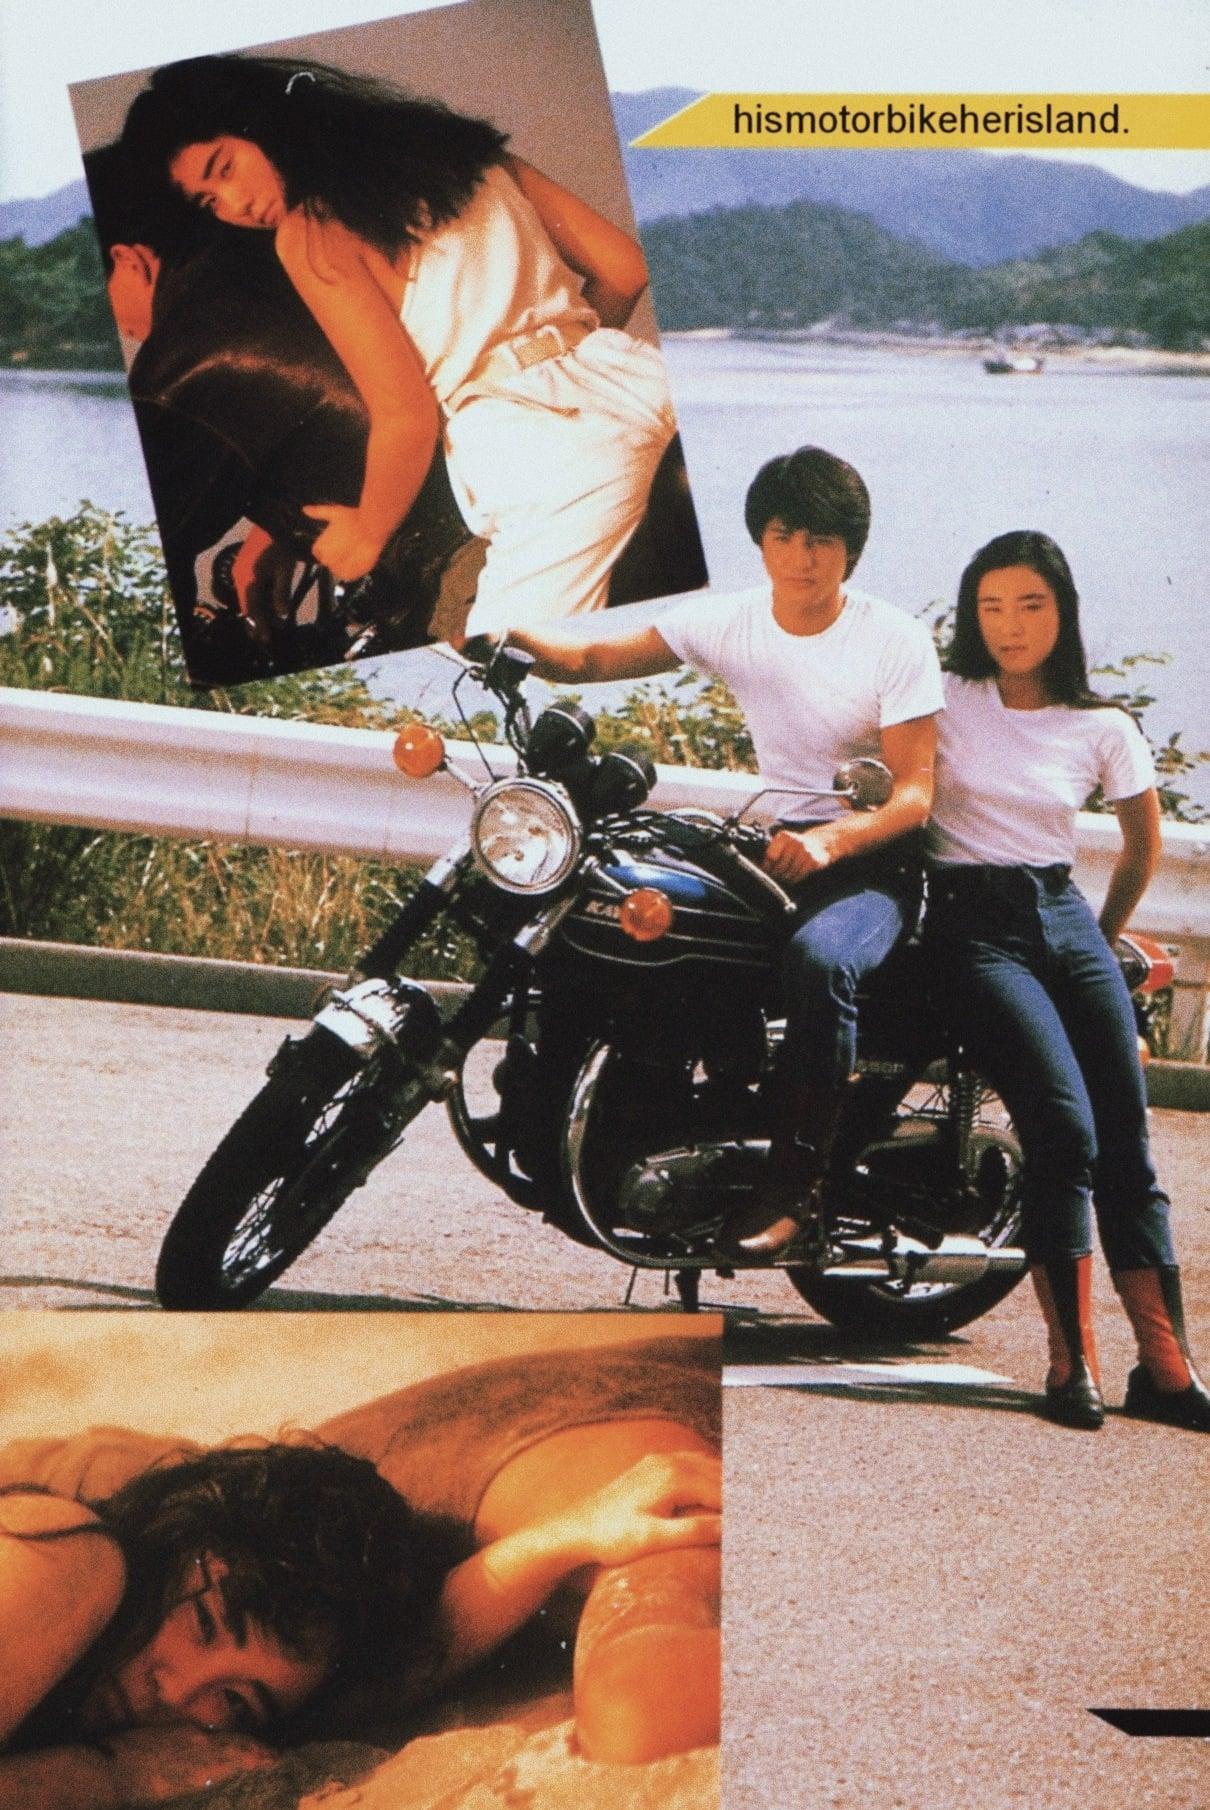 His Motorbike, Her Island poster